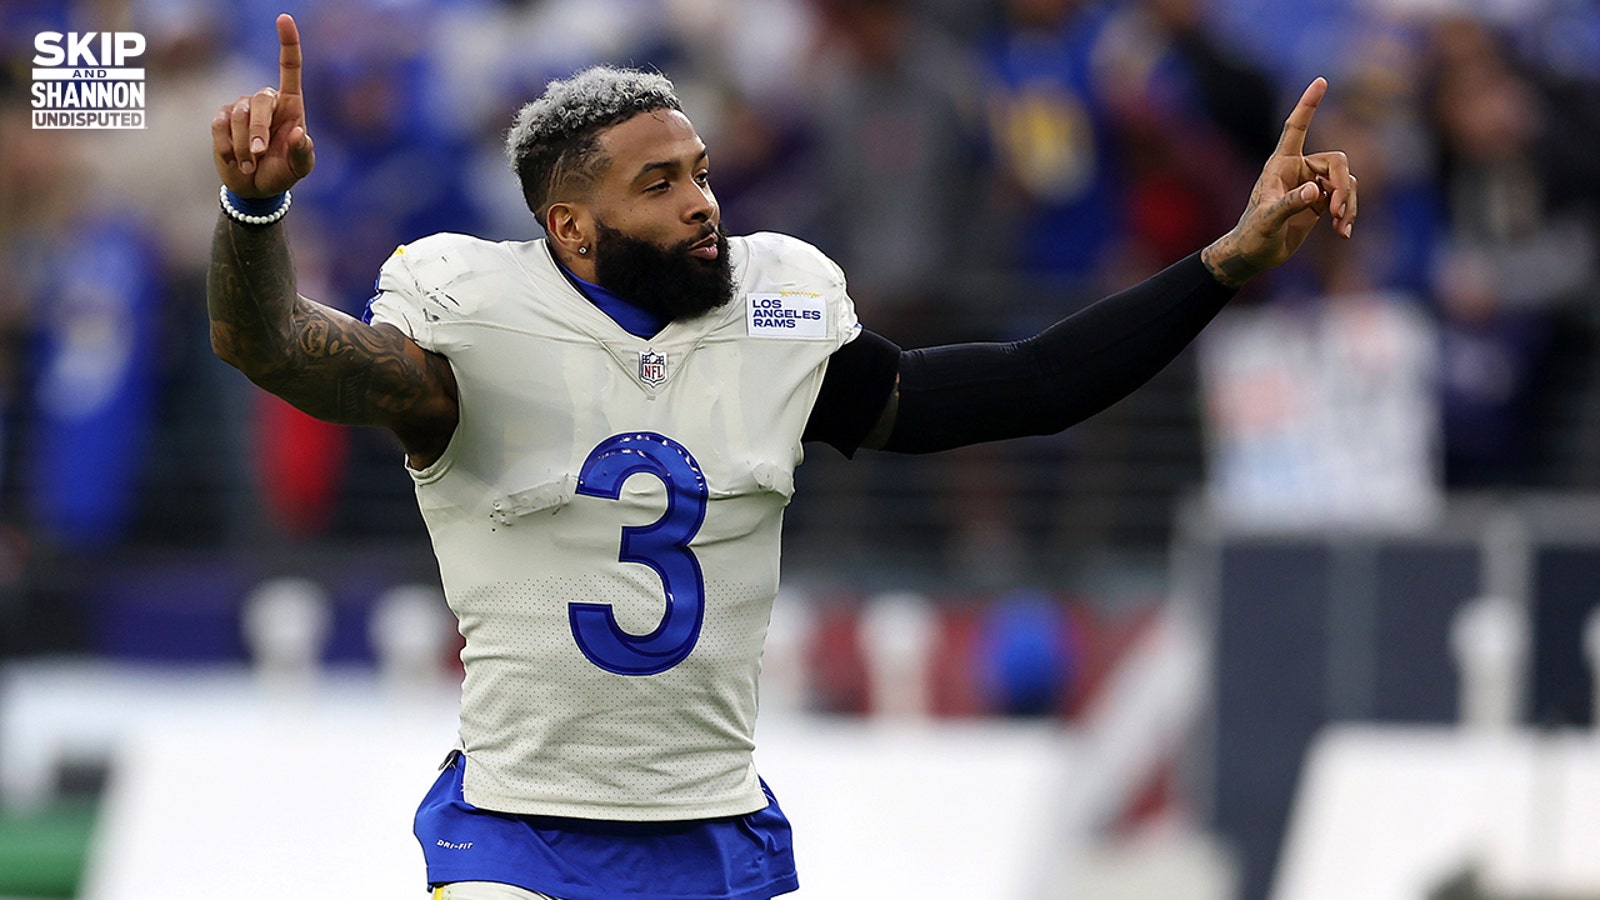 Beryl TV play-604afd926001099--Odell_logo2_1668014307783 The time has come for Cowboys to sign Odell Beckham Jr. Sports 